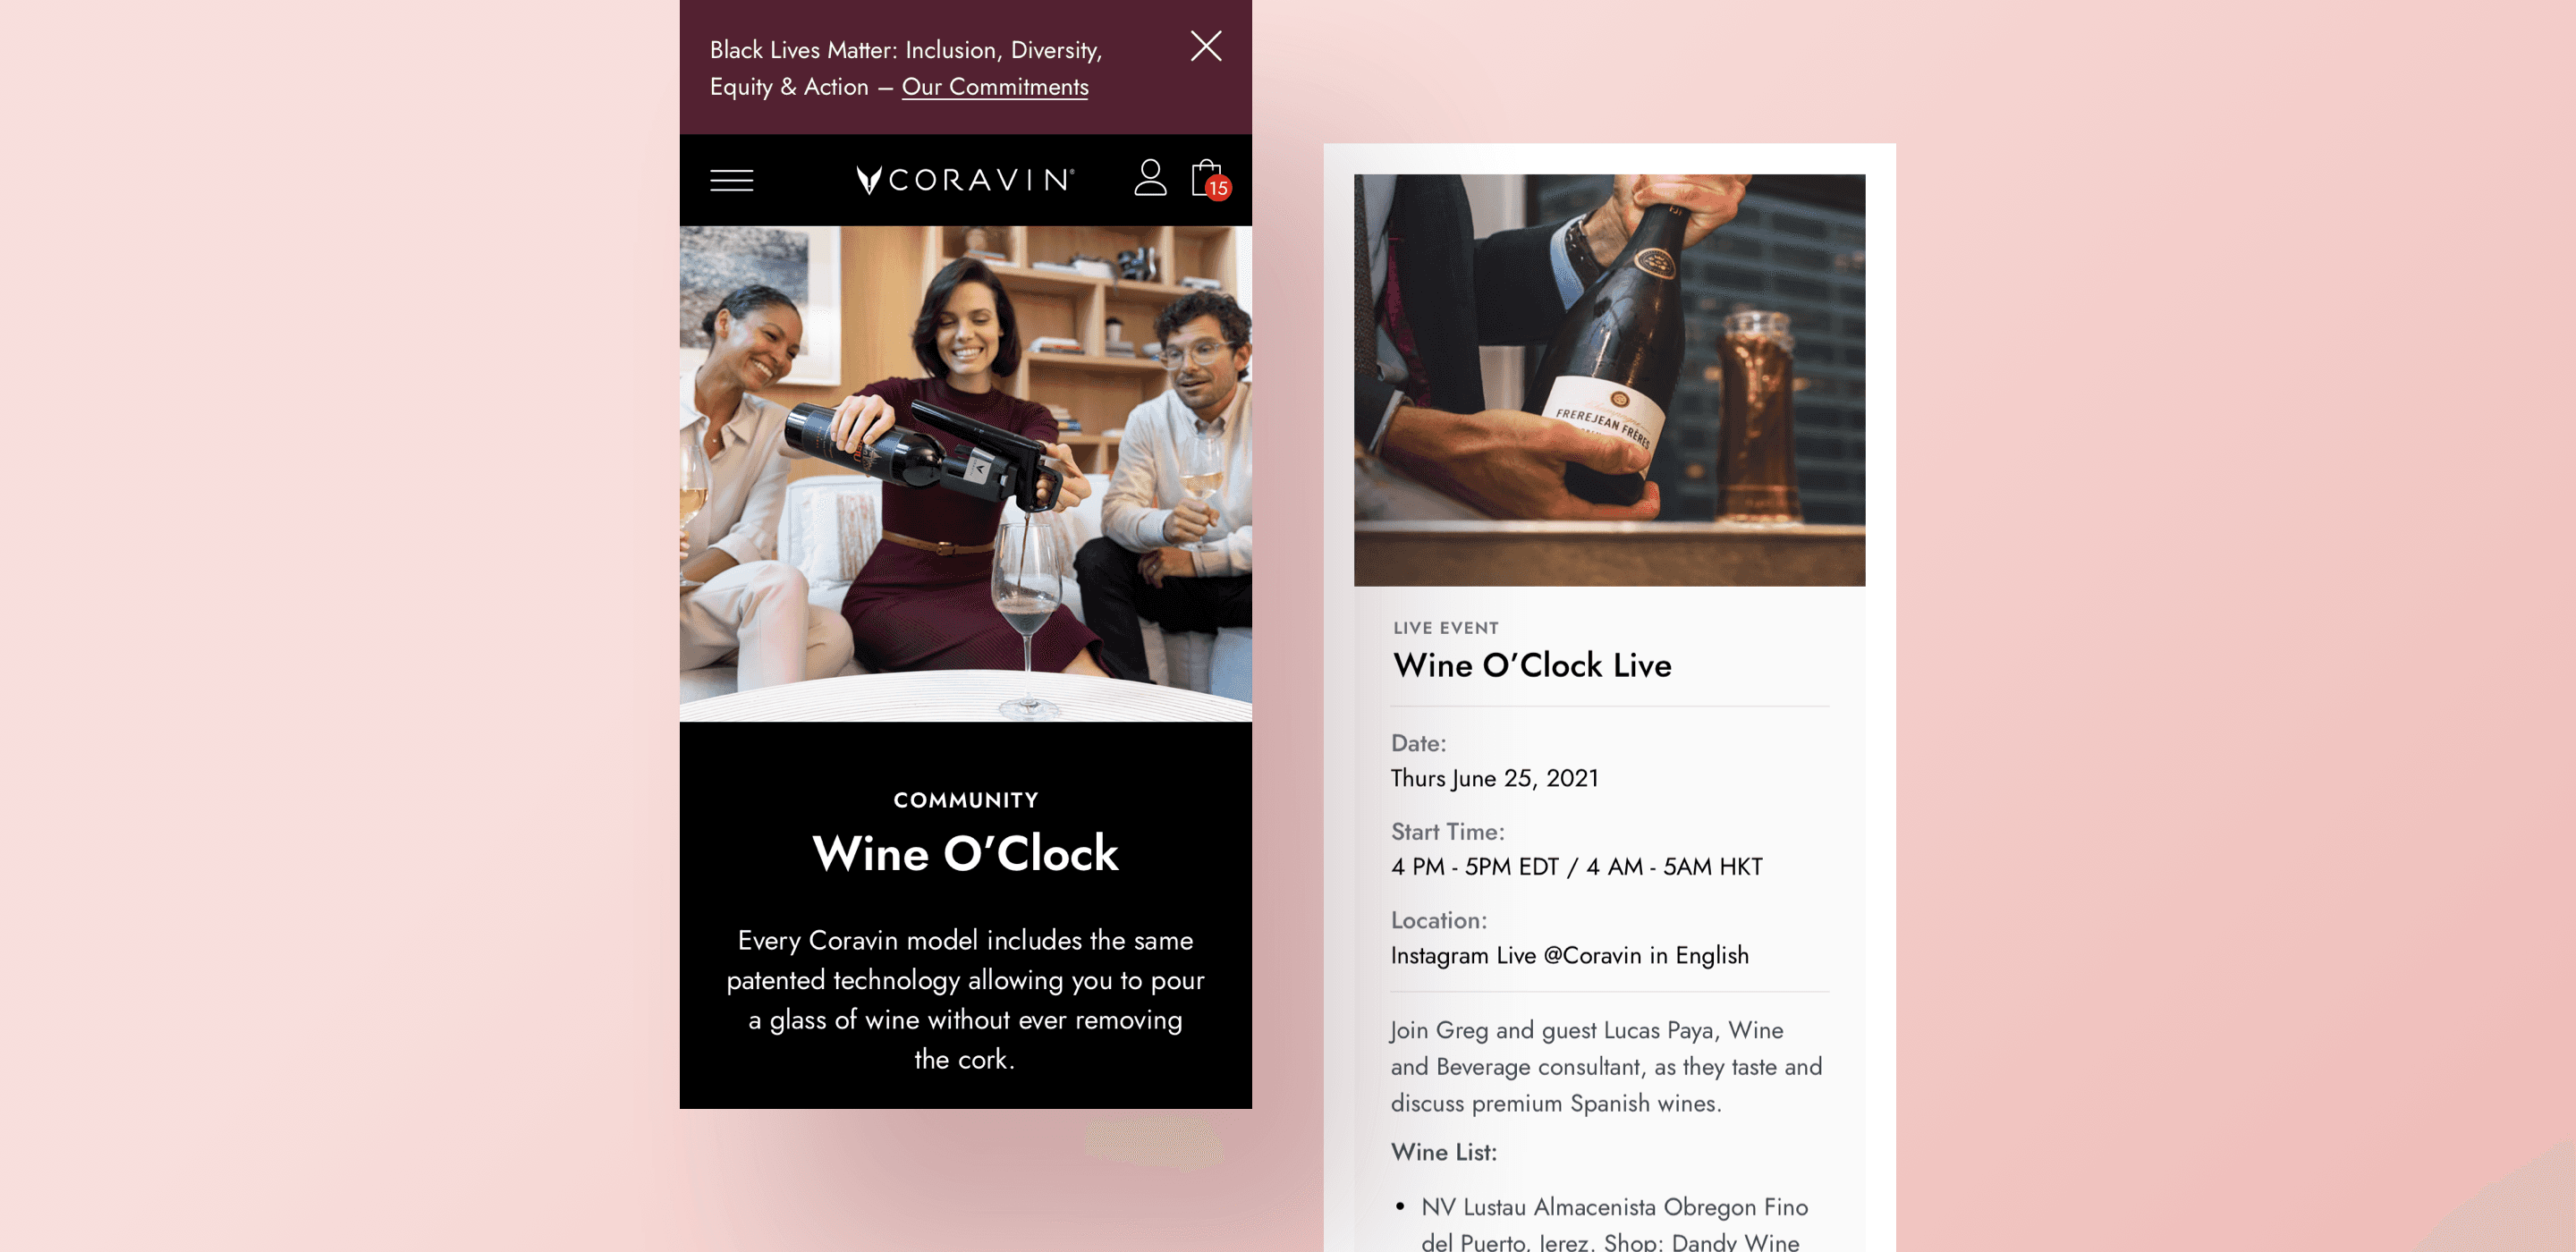 Coravin consumer app with screenshots of community events.